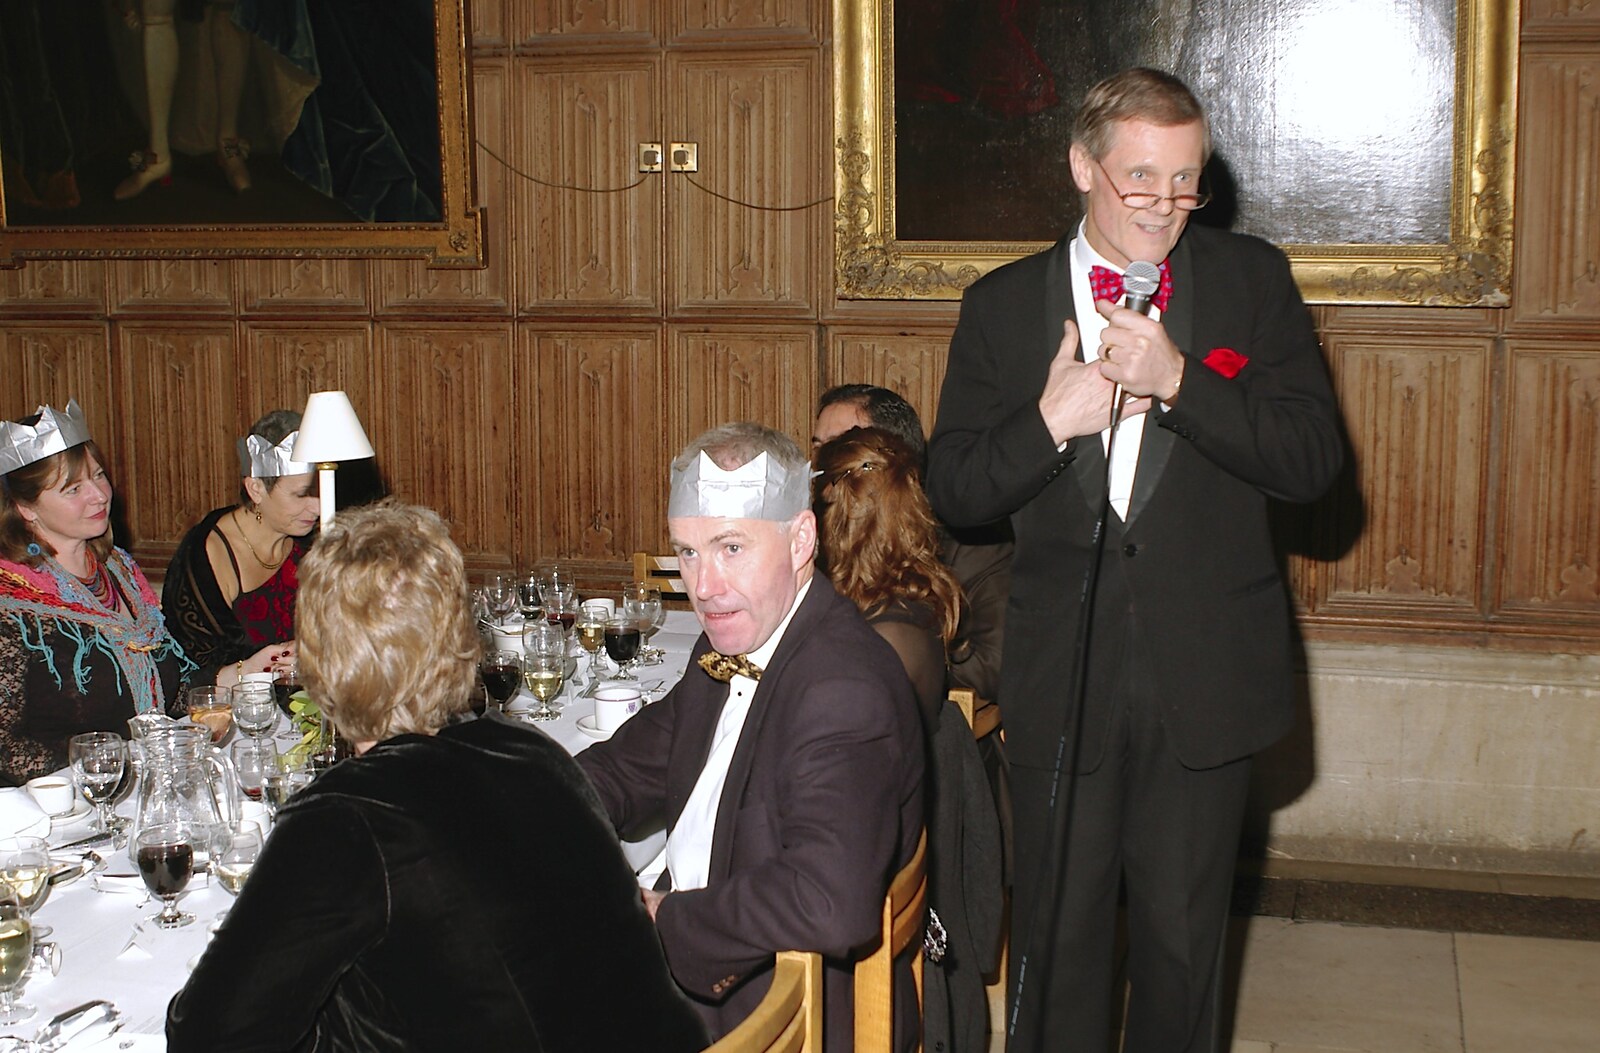 Tim Simpson does a speech from Qualcomm Cambridge's Christmas Do, King's College, Cambridge - 22nd December 2004